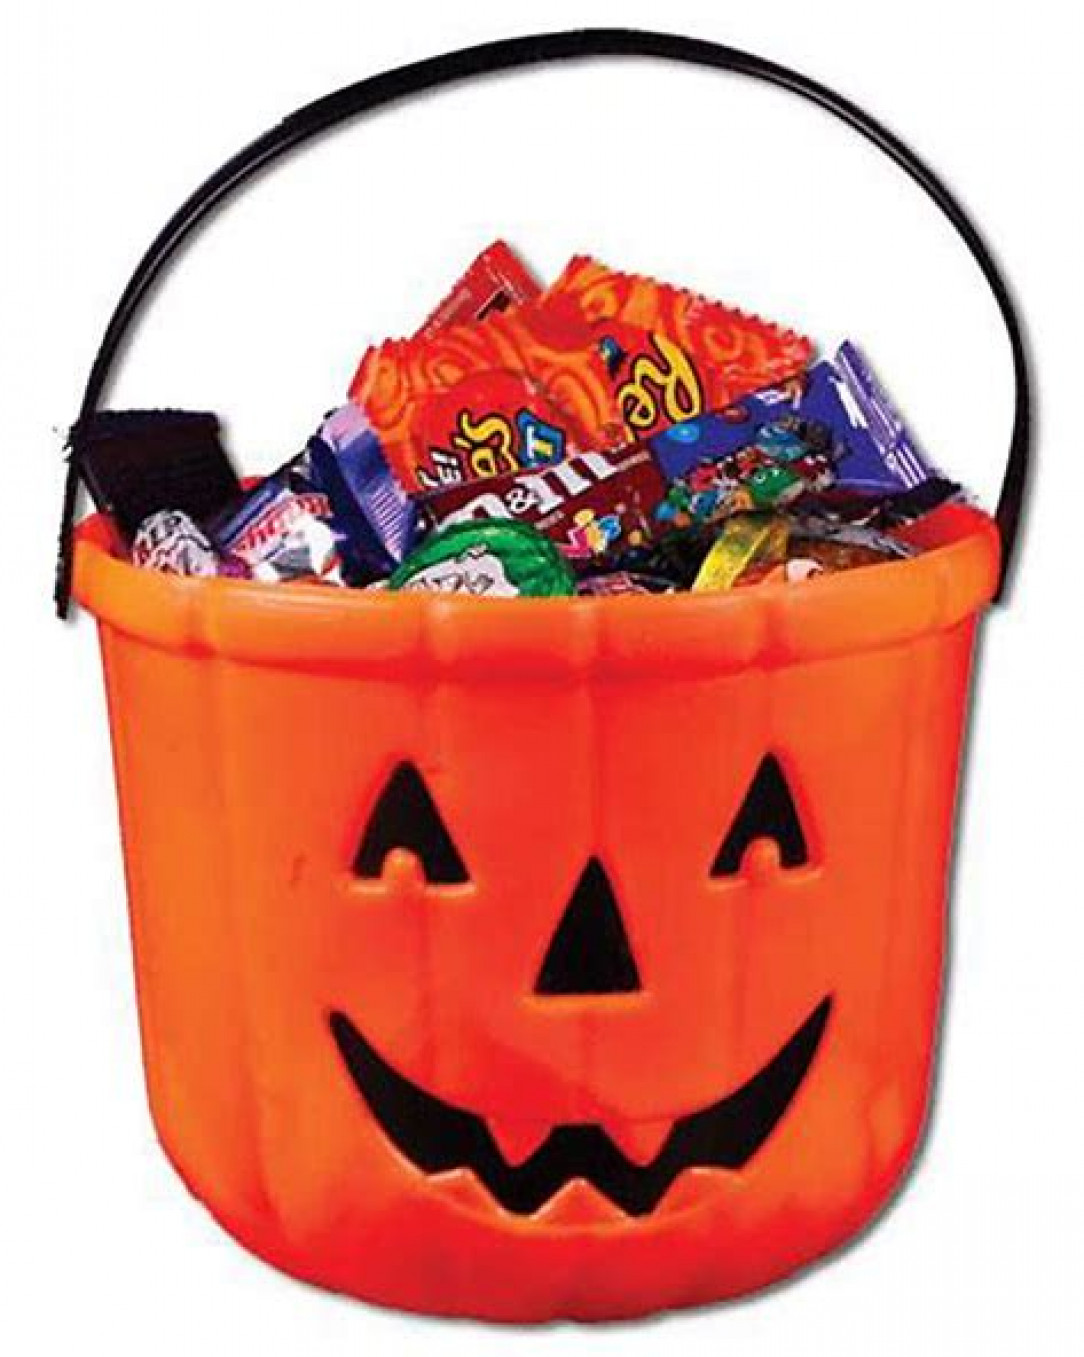 The smell from the bucket (or bag) of Halloween candy after an hour or 2 of trick or treating is just wafting back